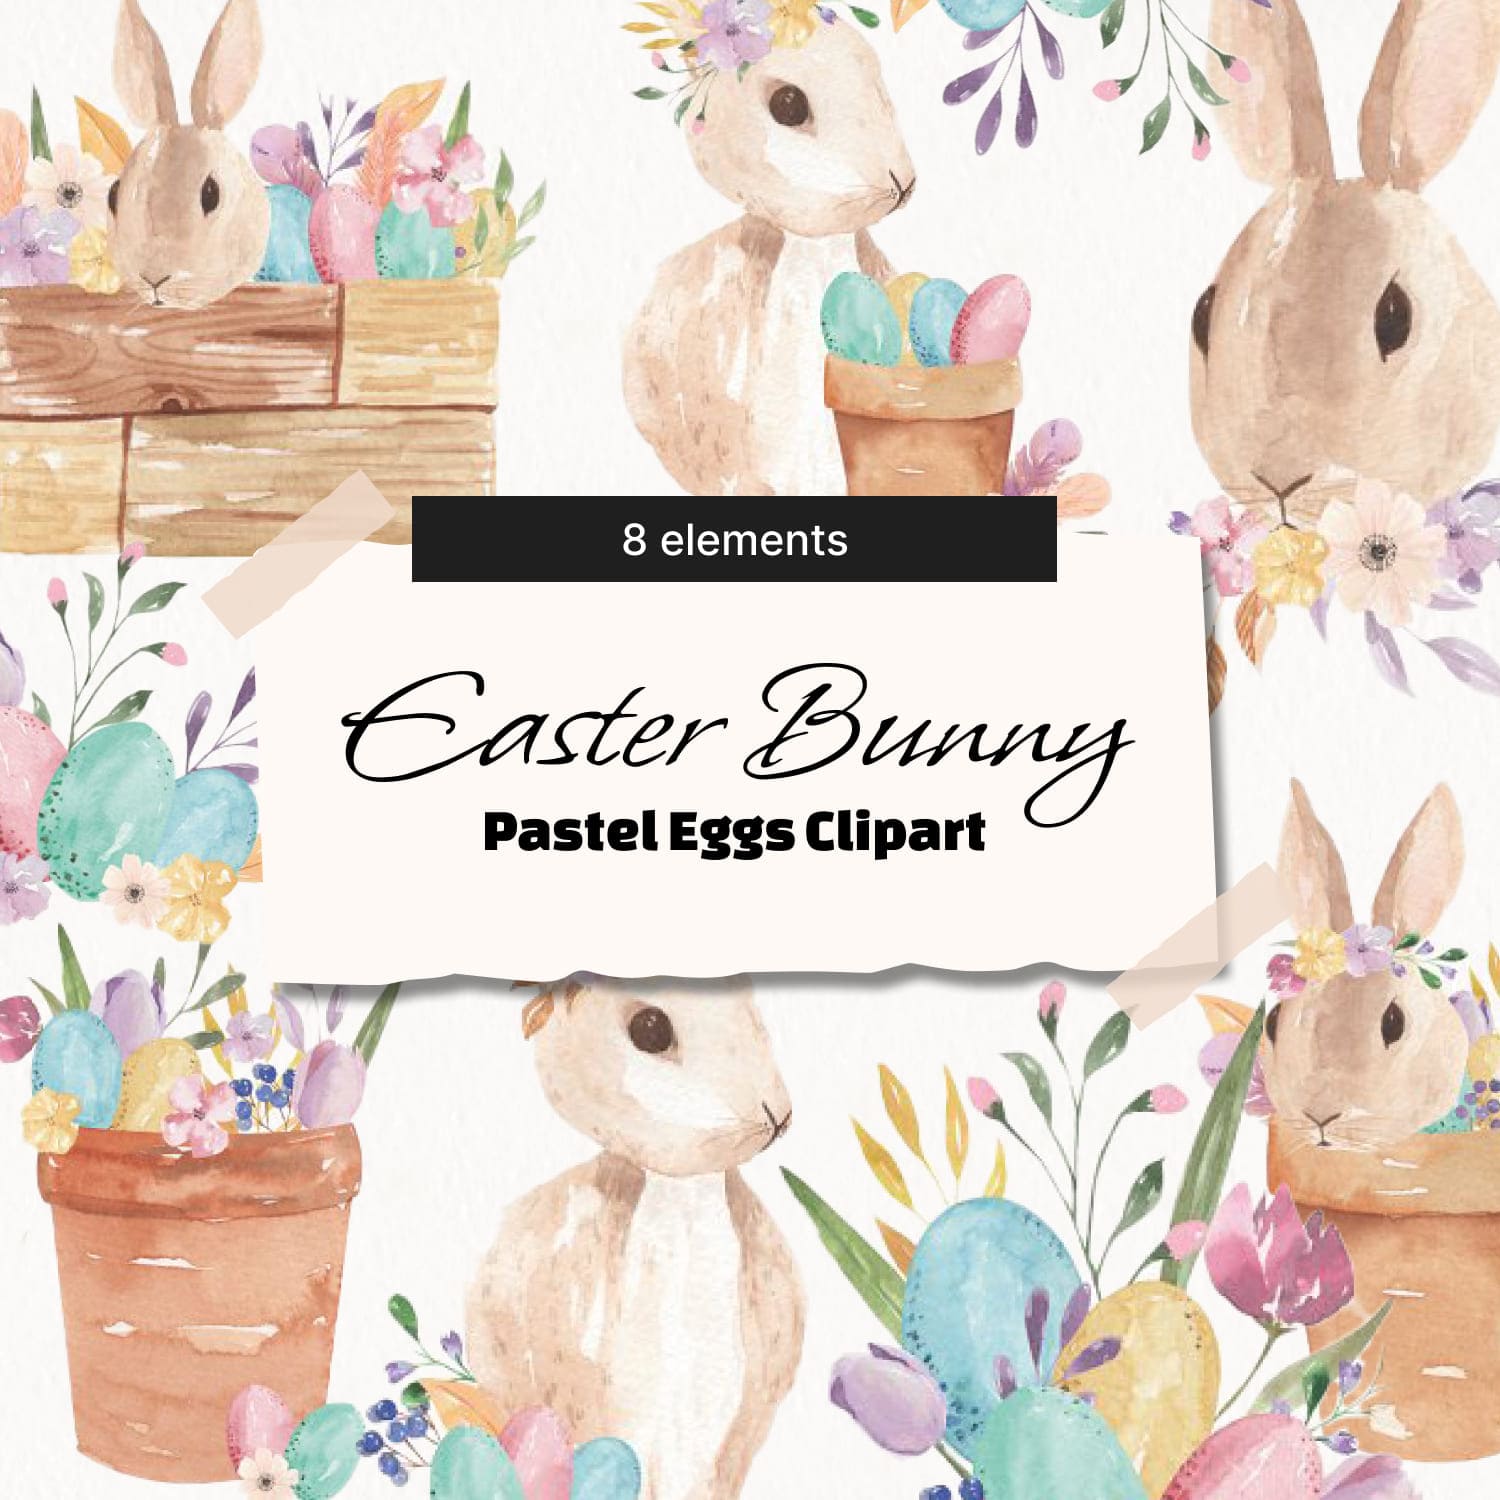 Easter bunny pastel eggs clipart kit, first picture 1500x1500.